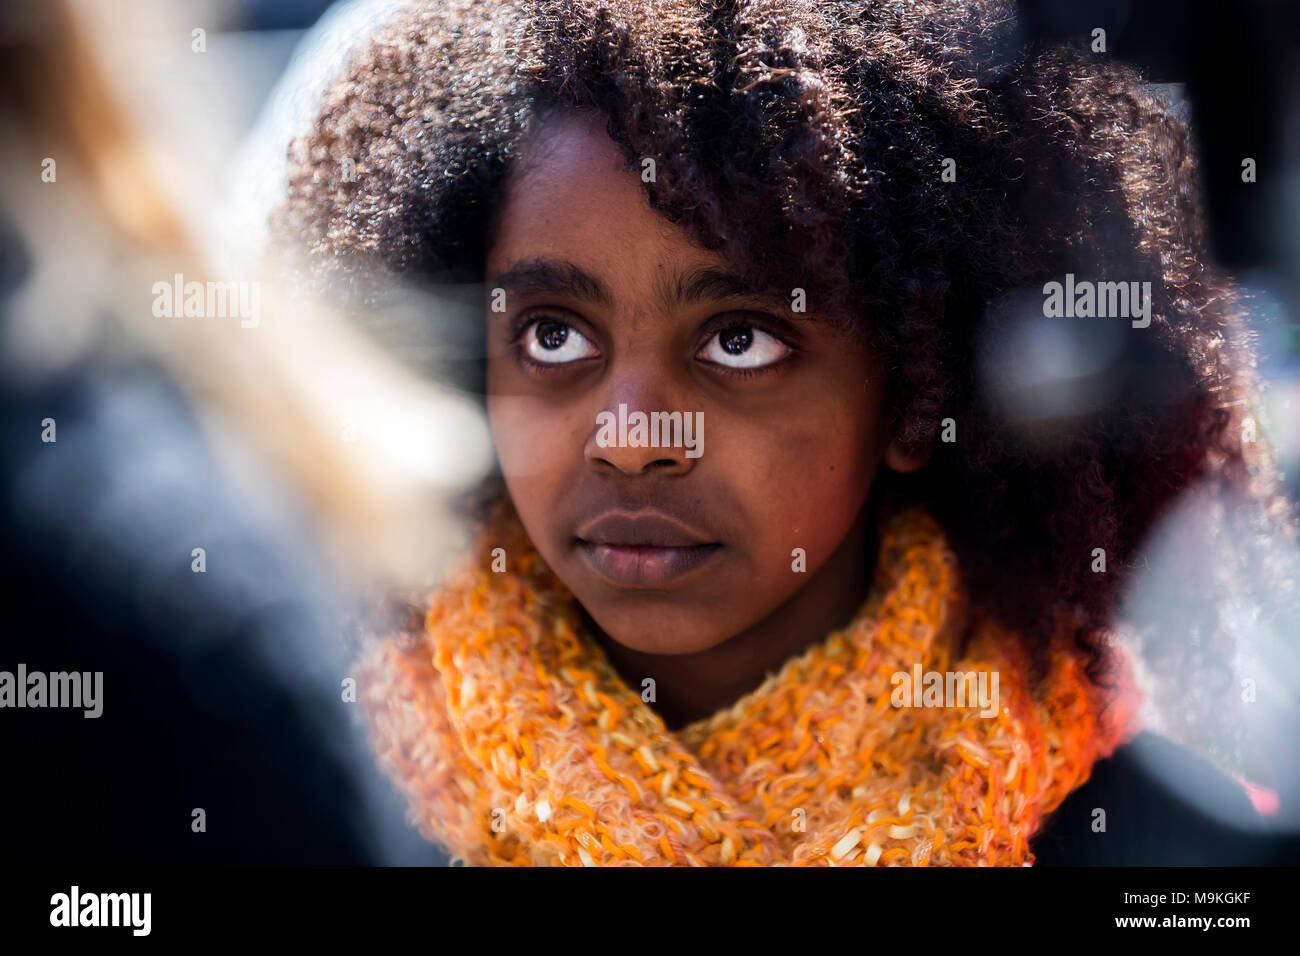 Washington Dc, United States. 24th Mar, 2018. Naomi Wadler, 11 years old: 'I am here today to acknowledge and represent the African-American girls whose stories who don't make the front page of every national newspaper.' Credit: Michael Nigro/Alamy Live News Stock Photo